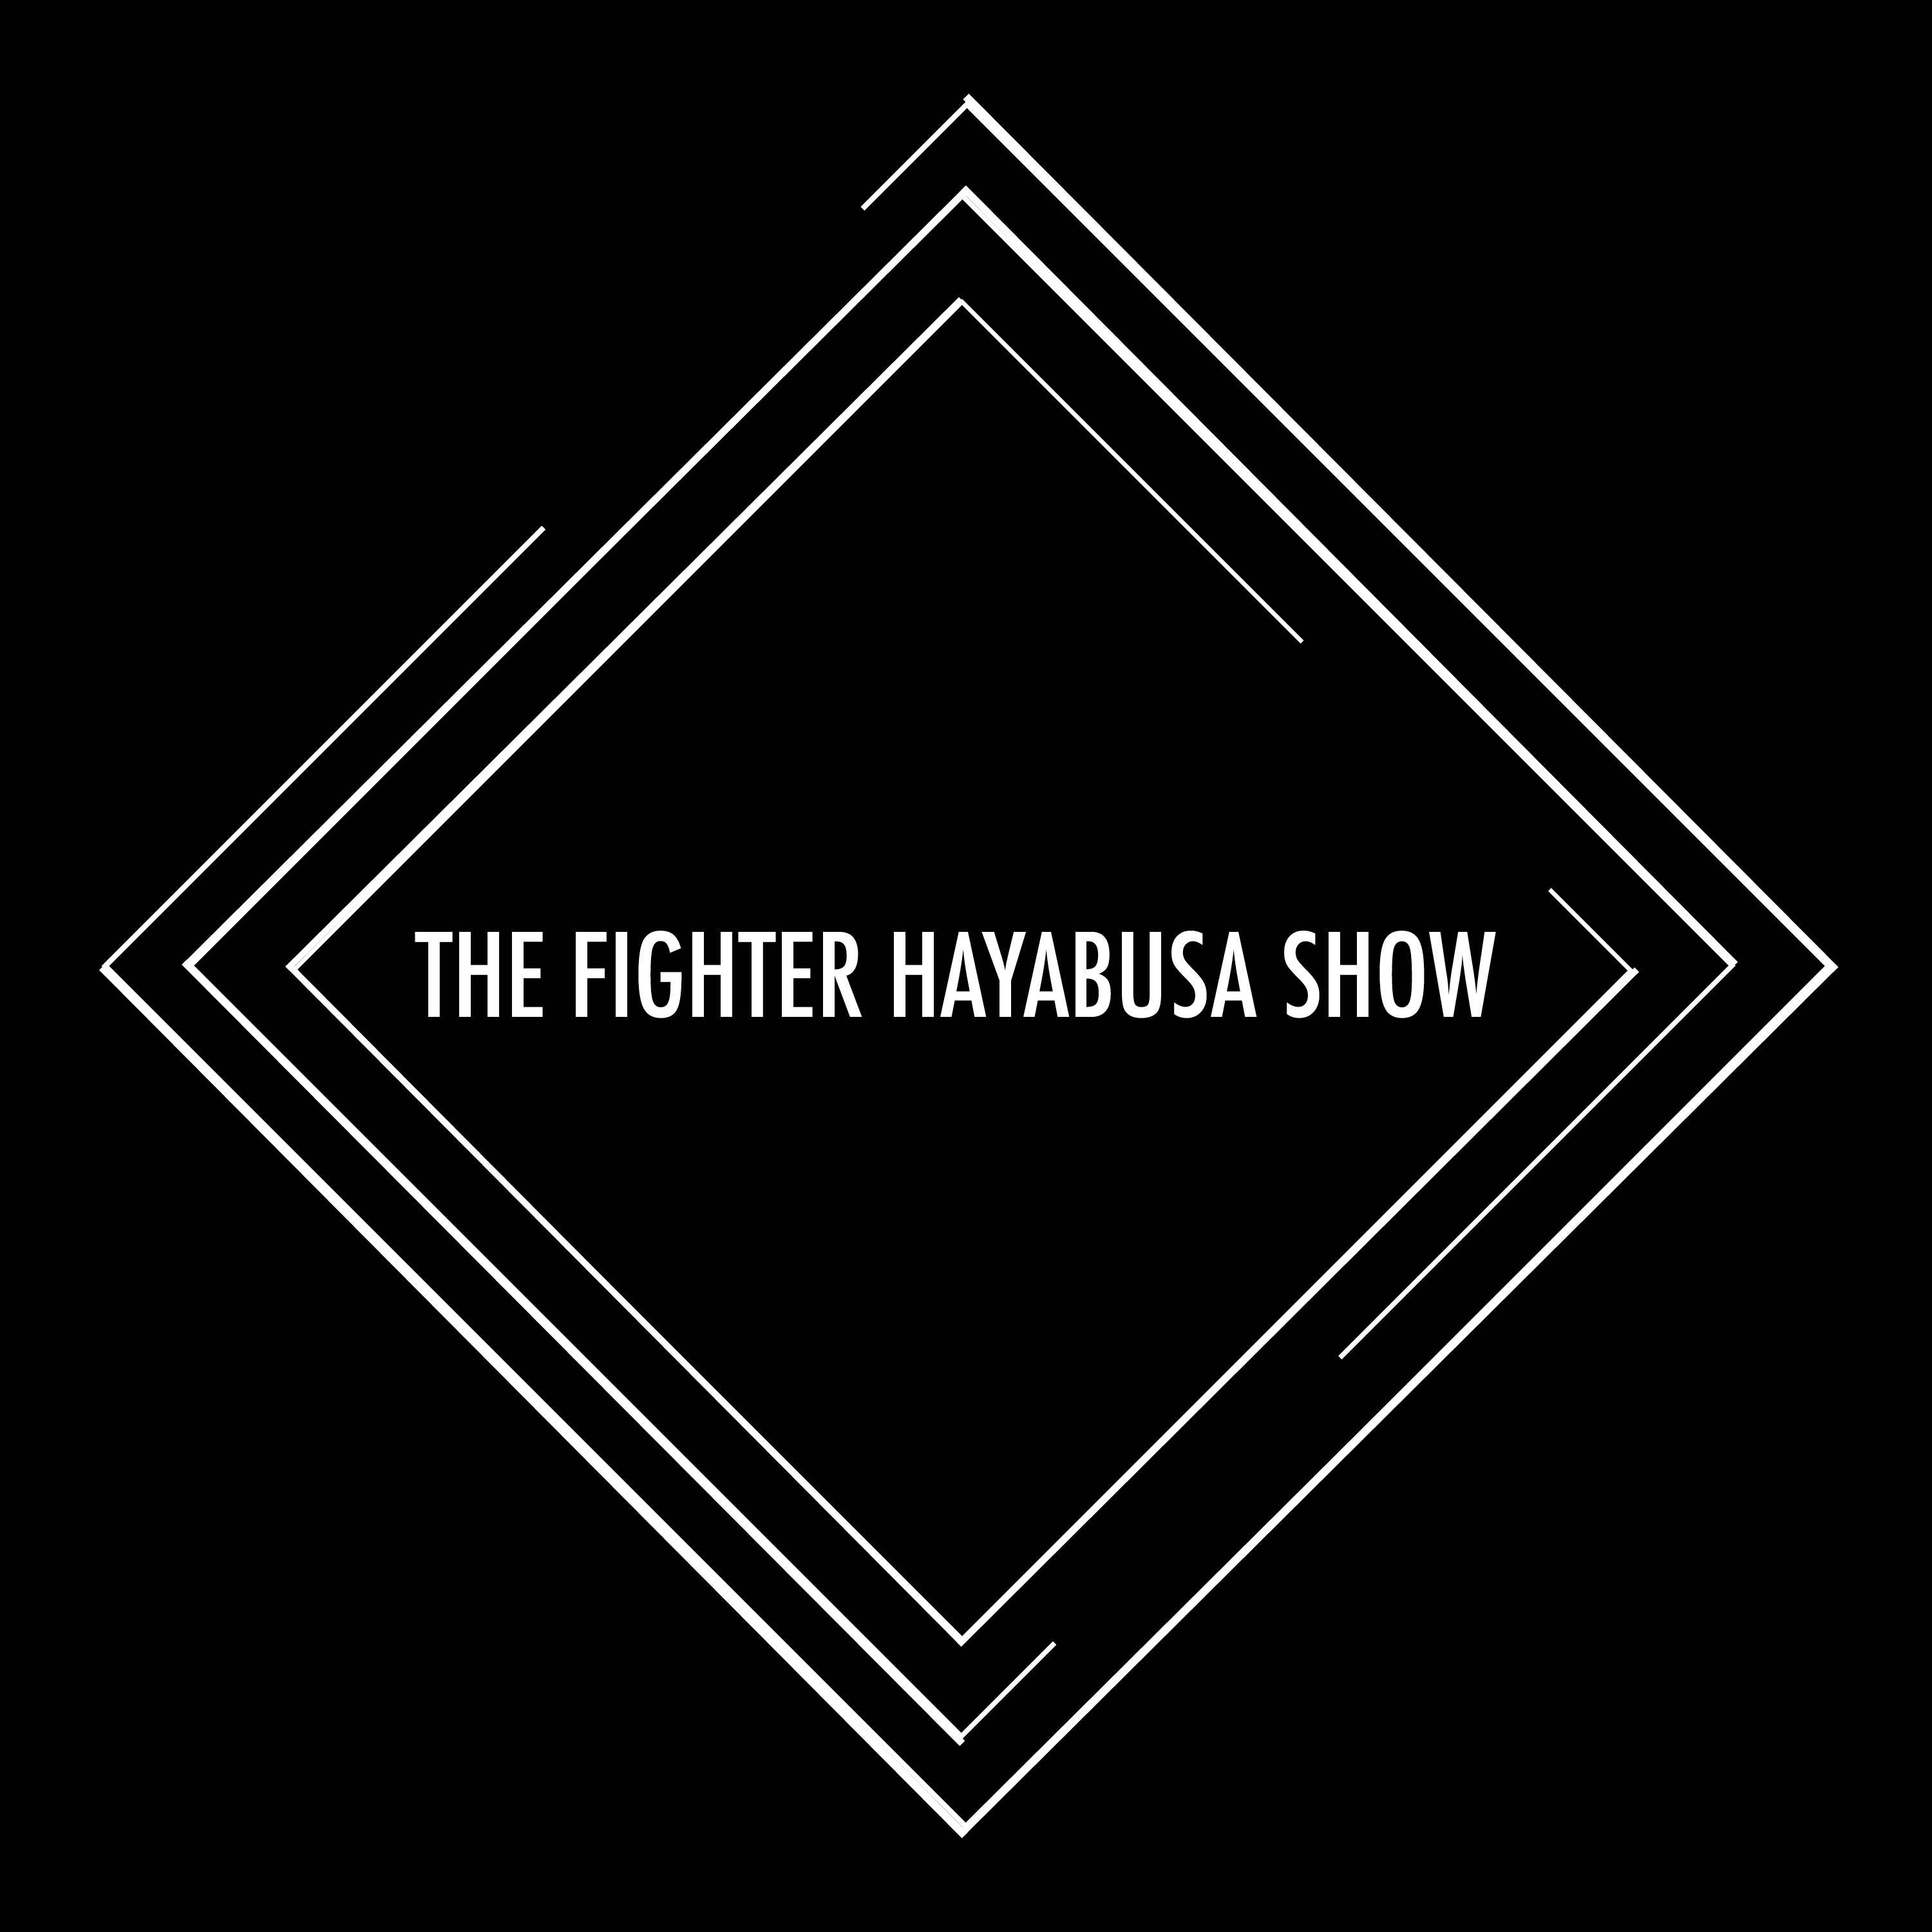 The Fighter Hayabusa Show for April 8th